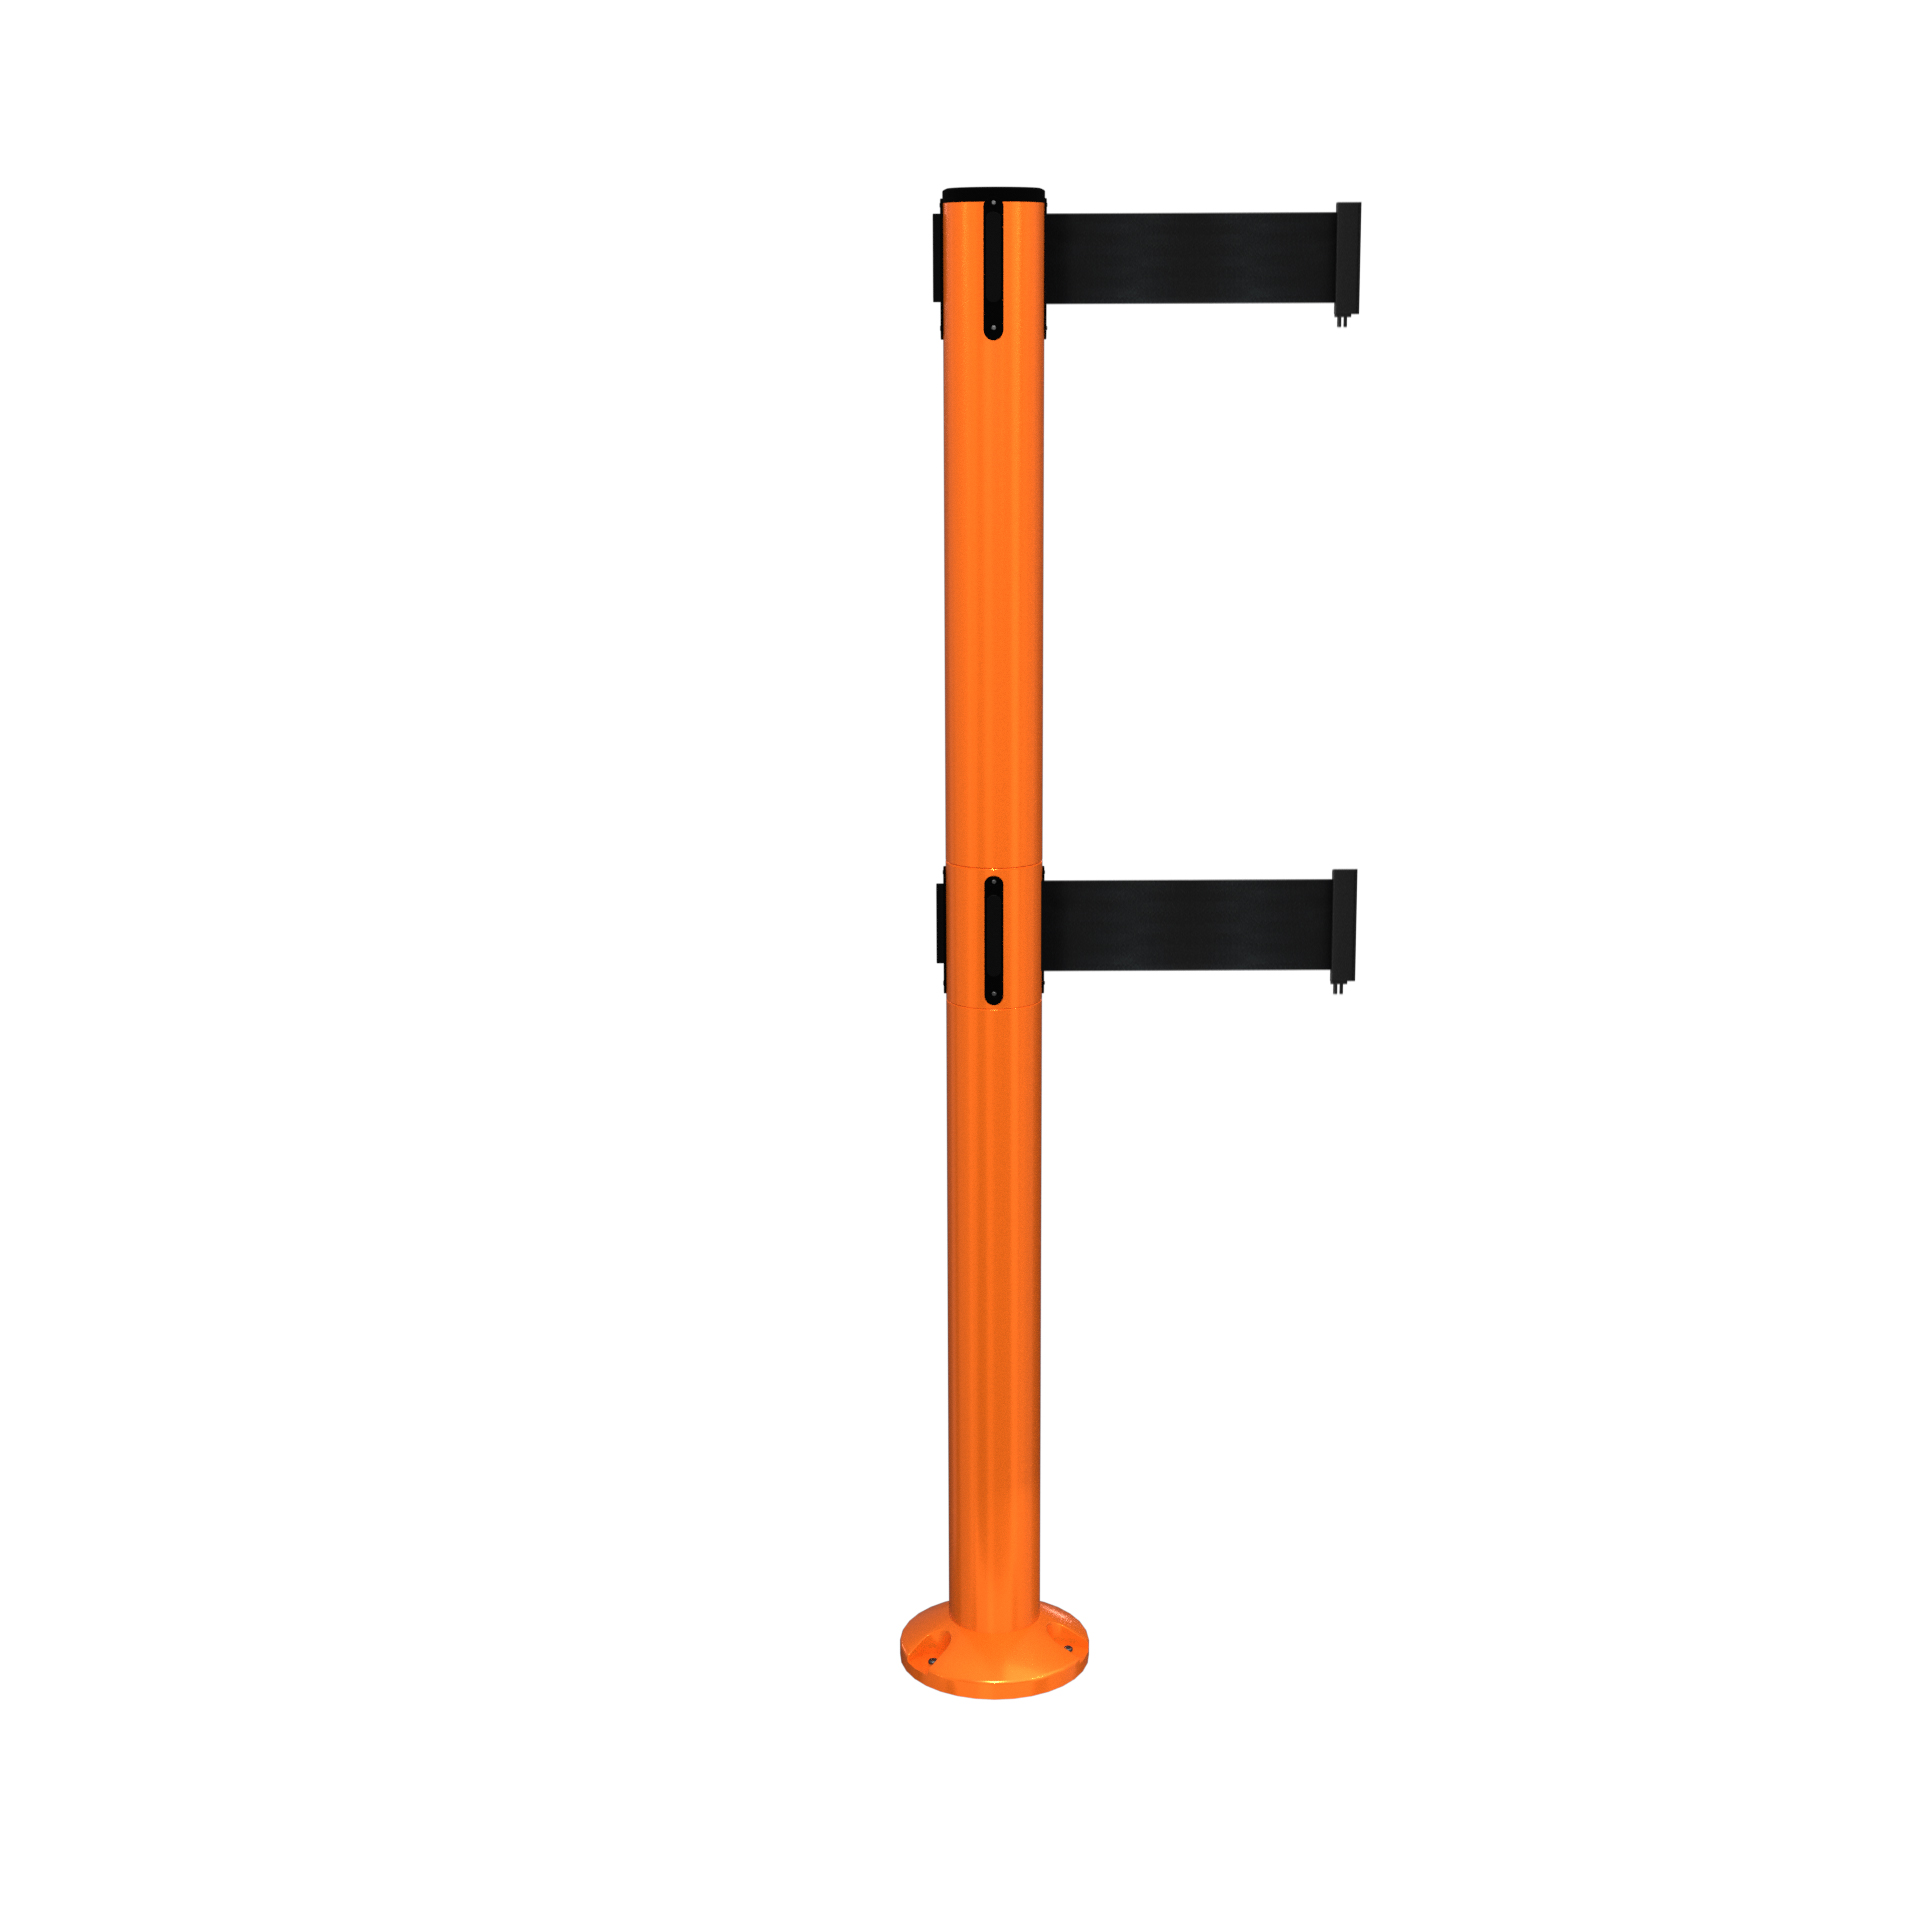 Orange SafetyPro 250 Fixed Retractable Belt Barrier with Twin Belts